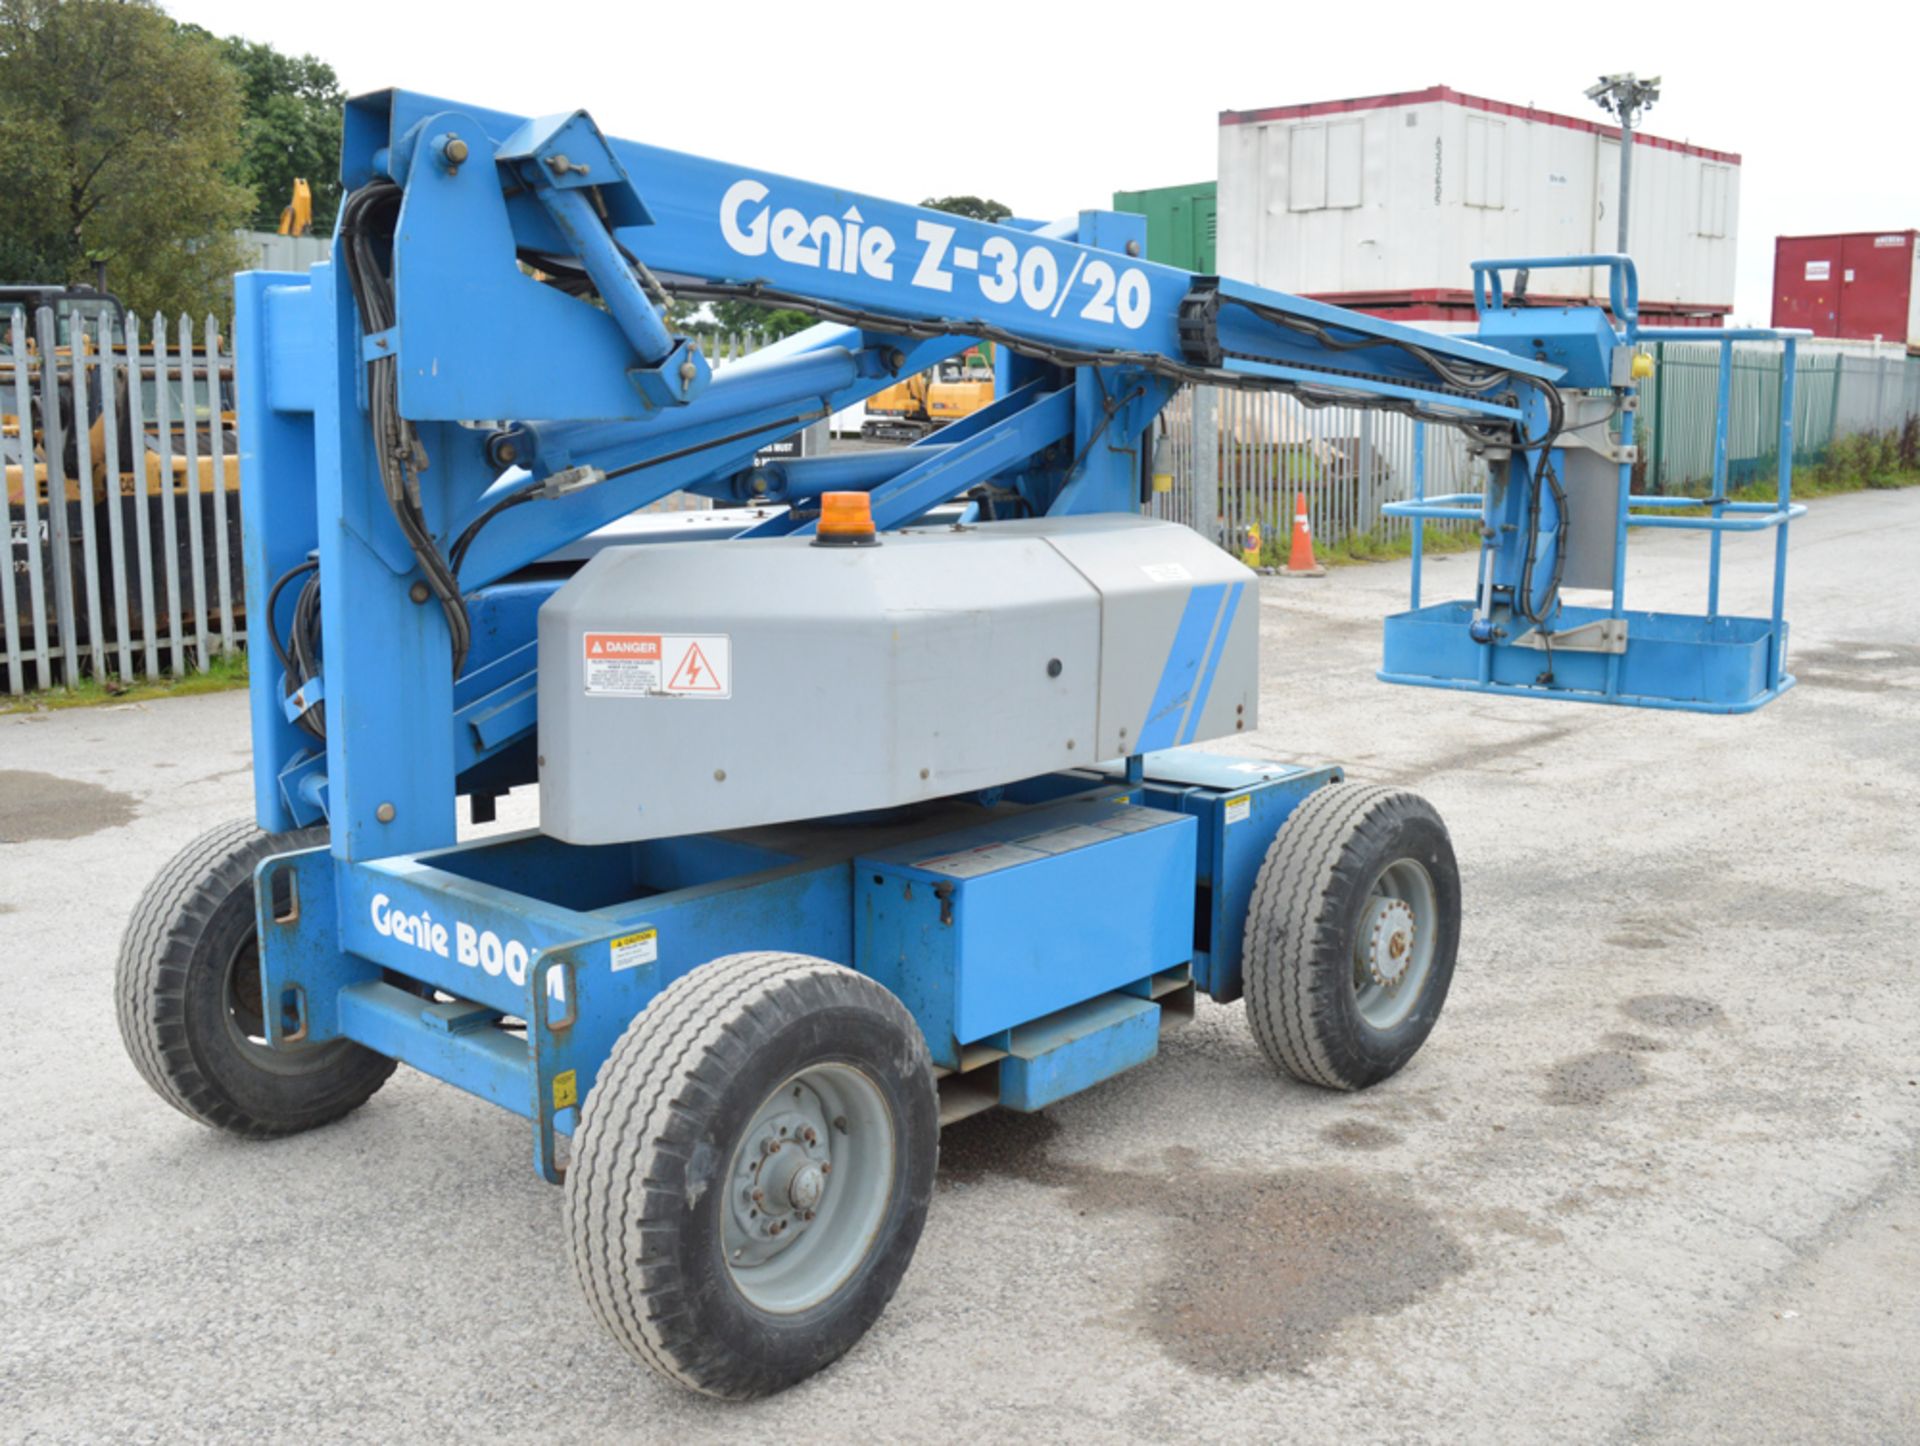 Genie Z-30/20 31 ft battery electric boom lift S/N: 23590 - Image 4 of 5